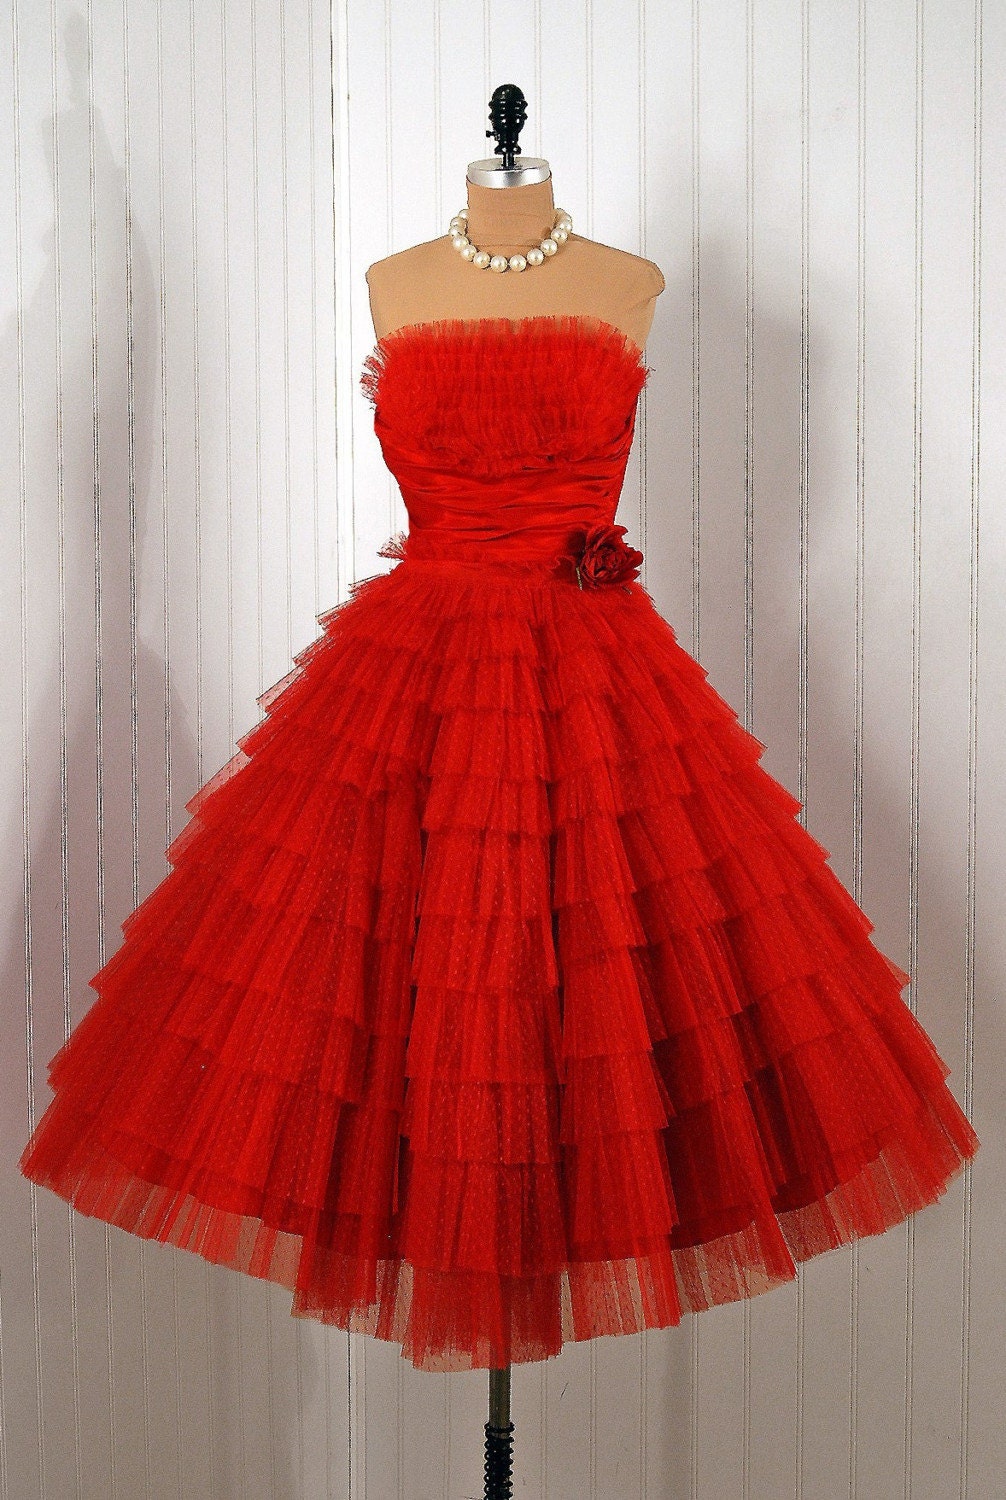 1950's Vintage Ruby-Red Strapless Shelf-Bust Tiered-Ruffle Tulle Rockabilly Party Dress